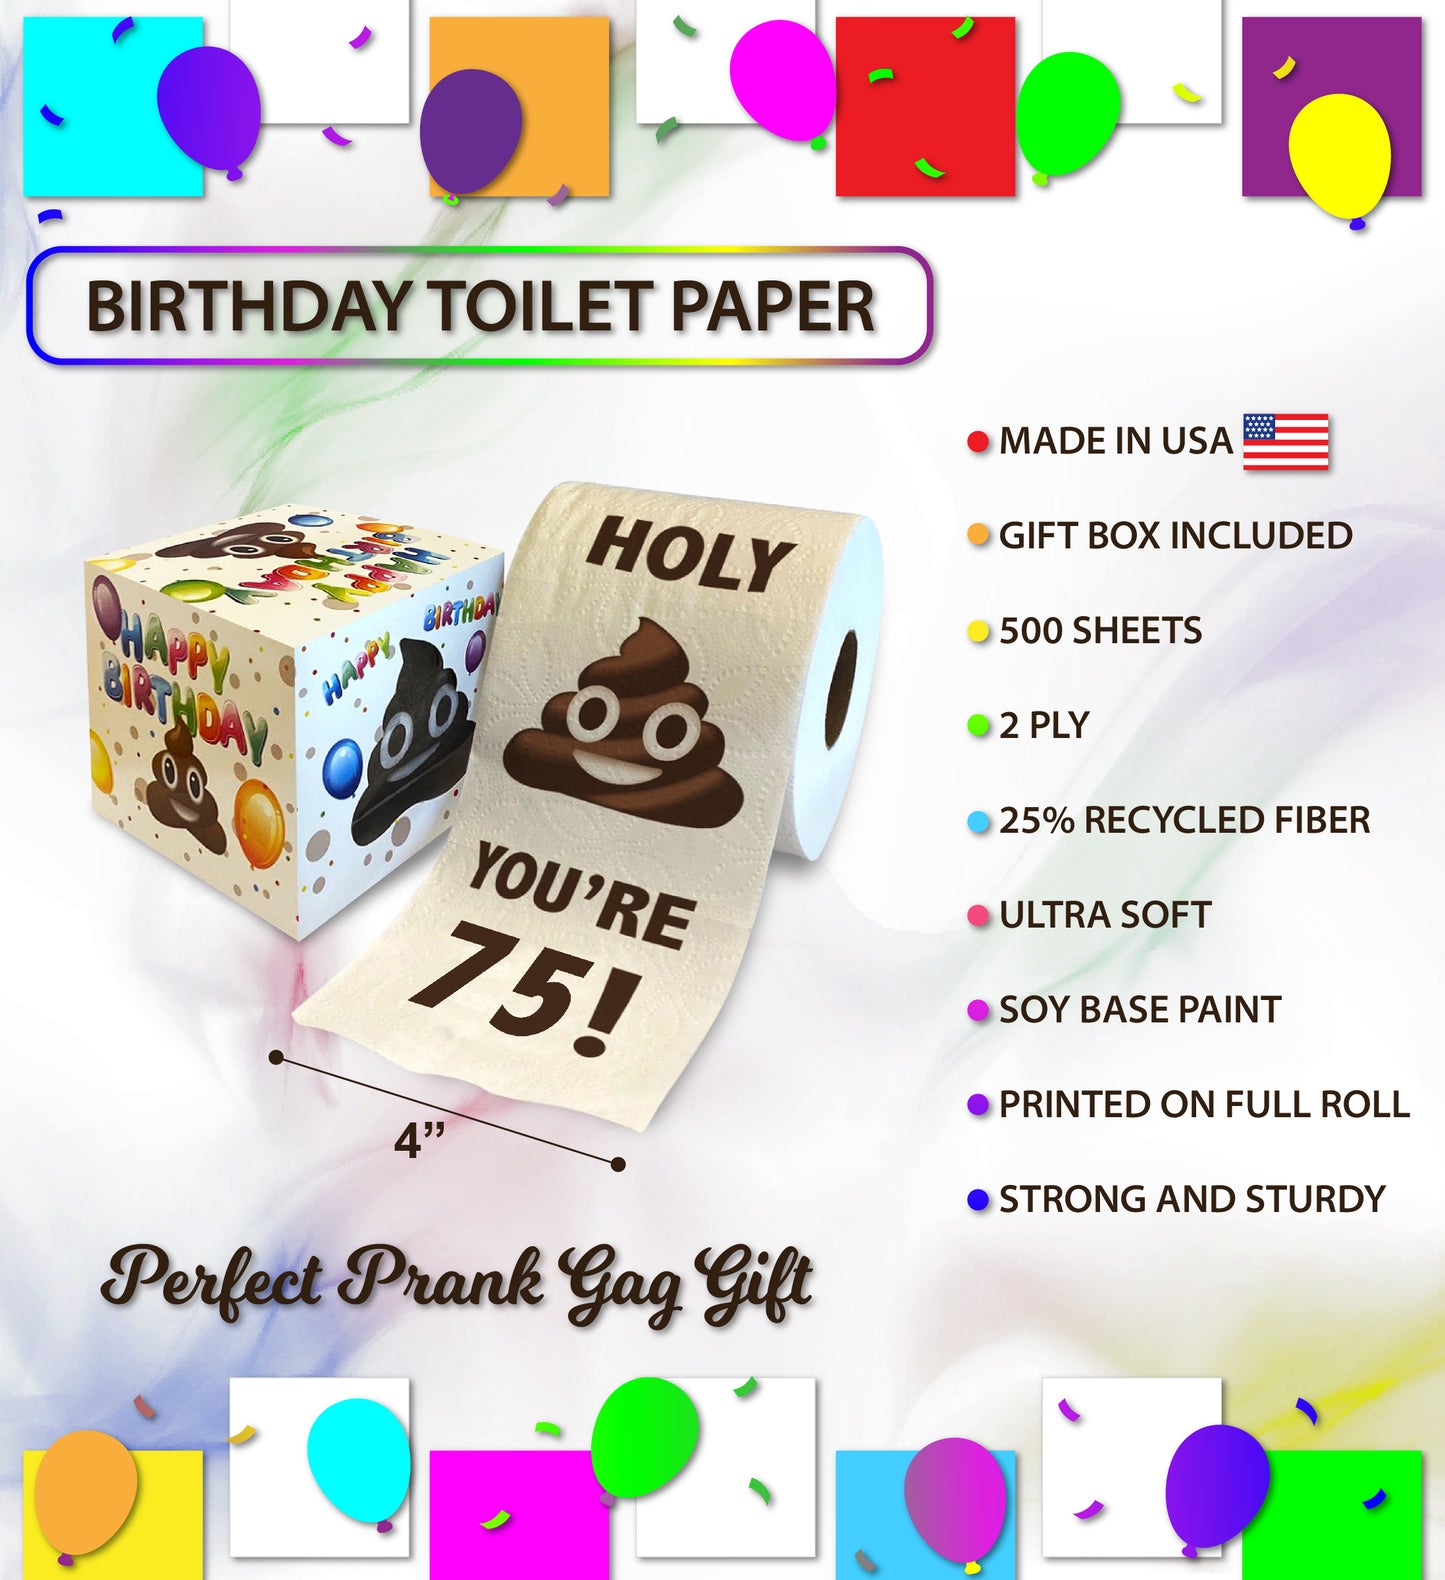 Printed TP Holy Poop You're 75 Funny Toilet Paper Roll Birthday Party Gag Gift